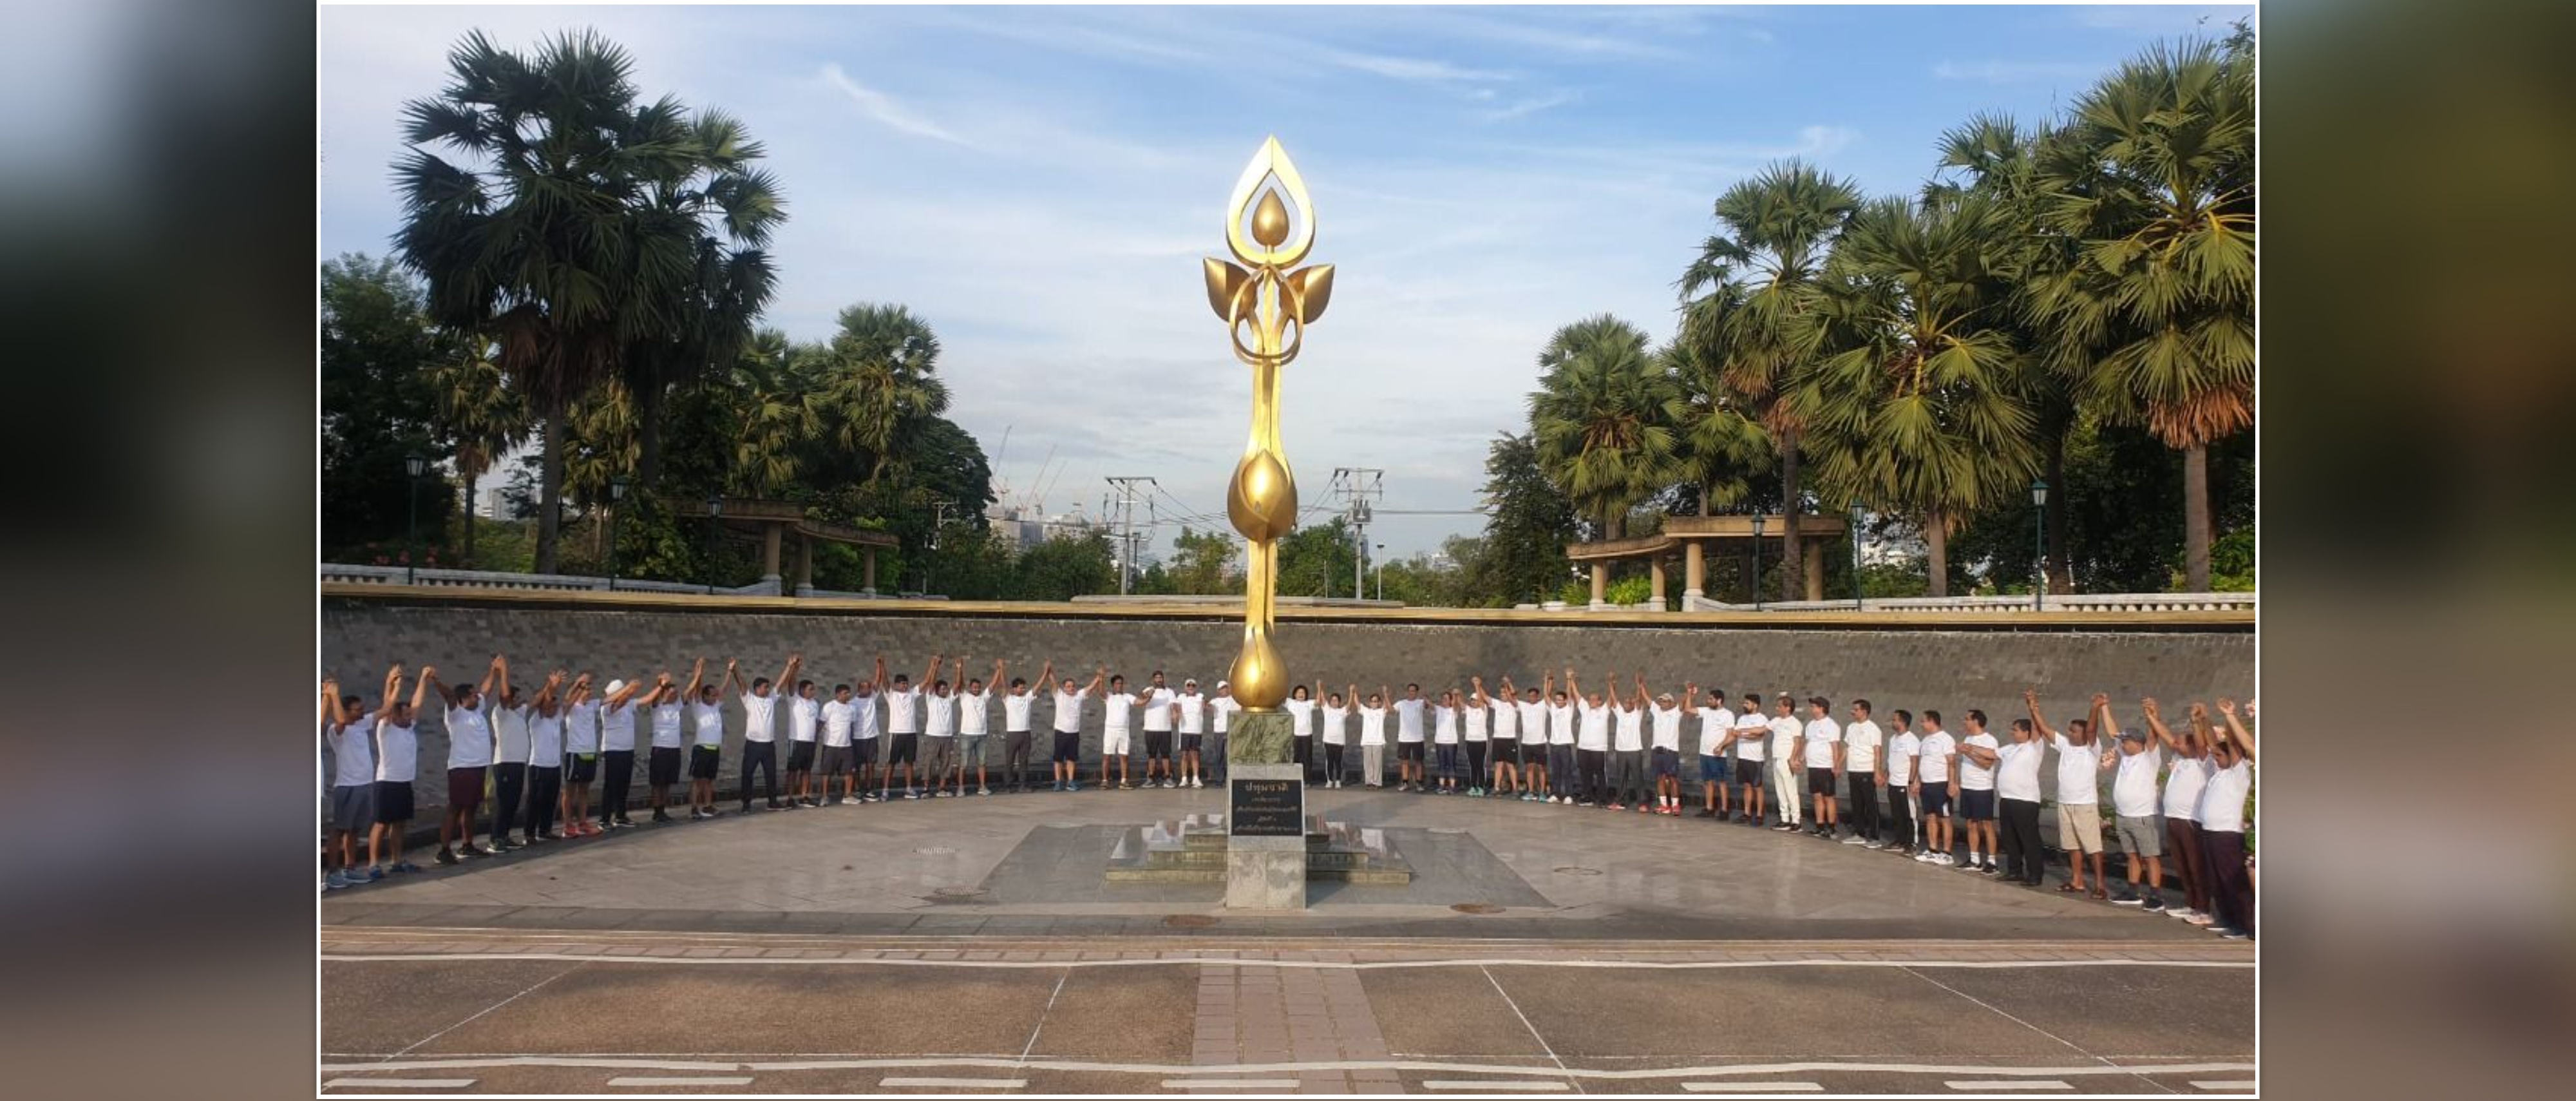  As part of the Festival of Unity, the Embassy organised a Unity Run and Human Unity Chain Formation on 26 October 2022 in Bangkok to commemorate the enormous contribution of the Iron Man of India Sardar Patel to the nation-building.